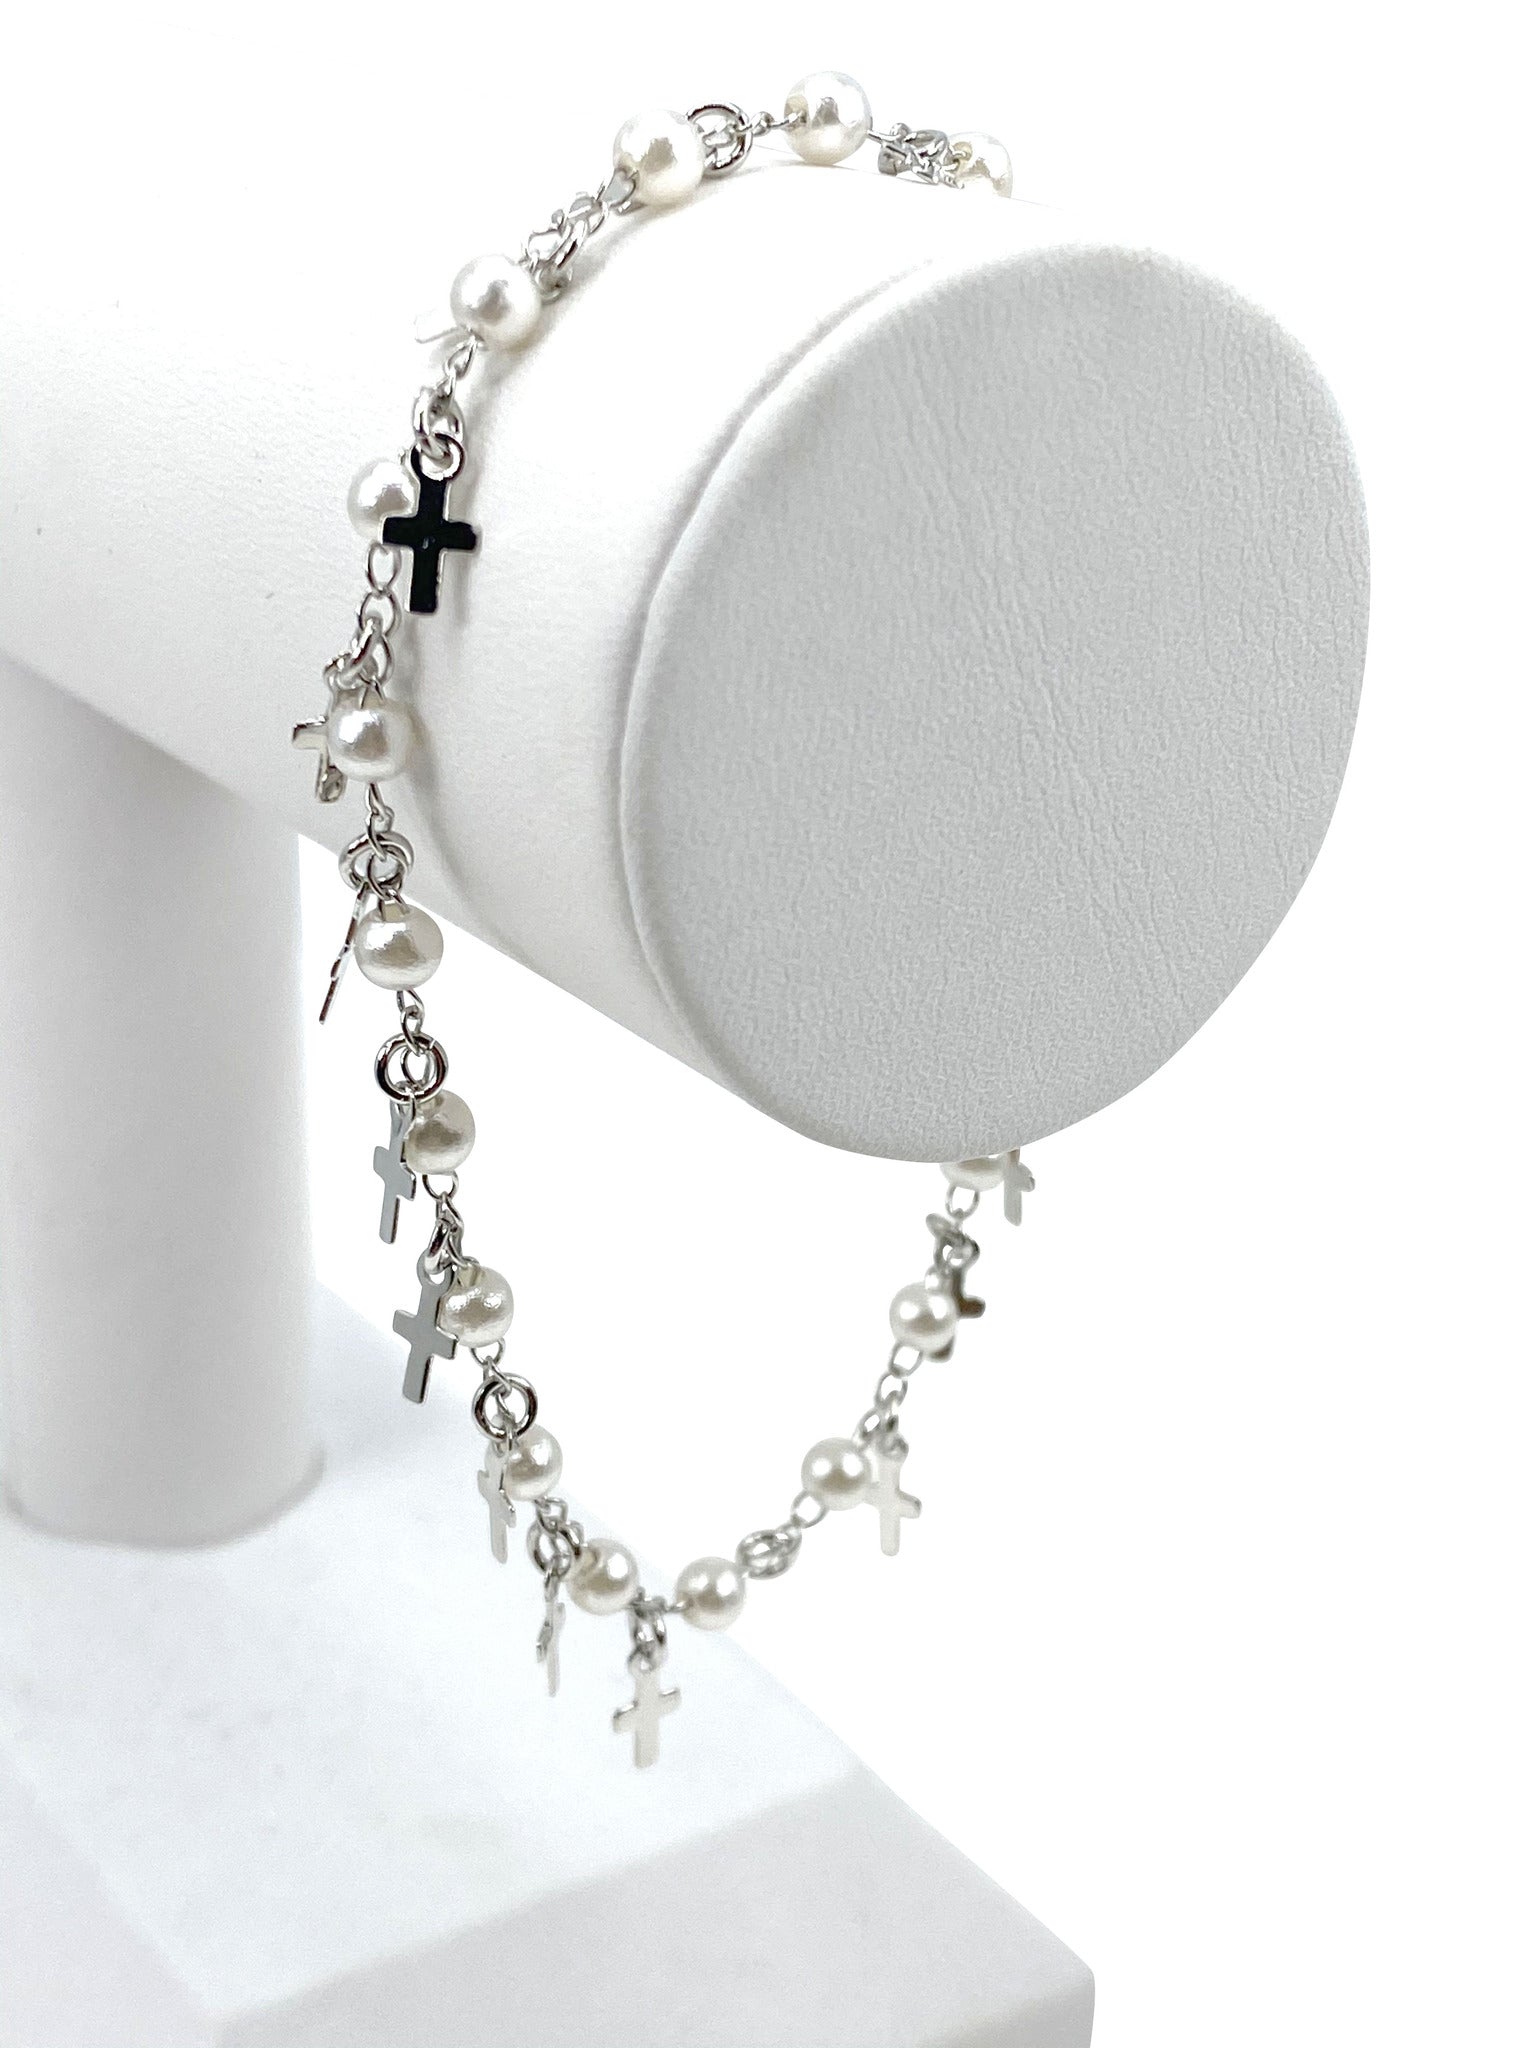 Bracelet  with simulated pearls and  crosses charms